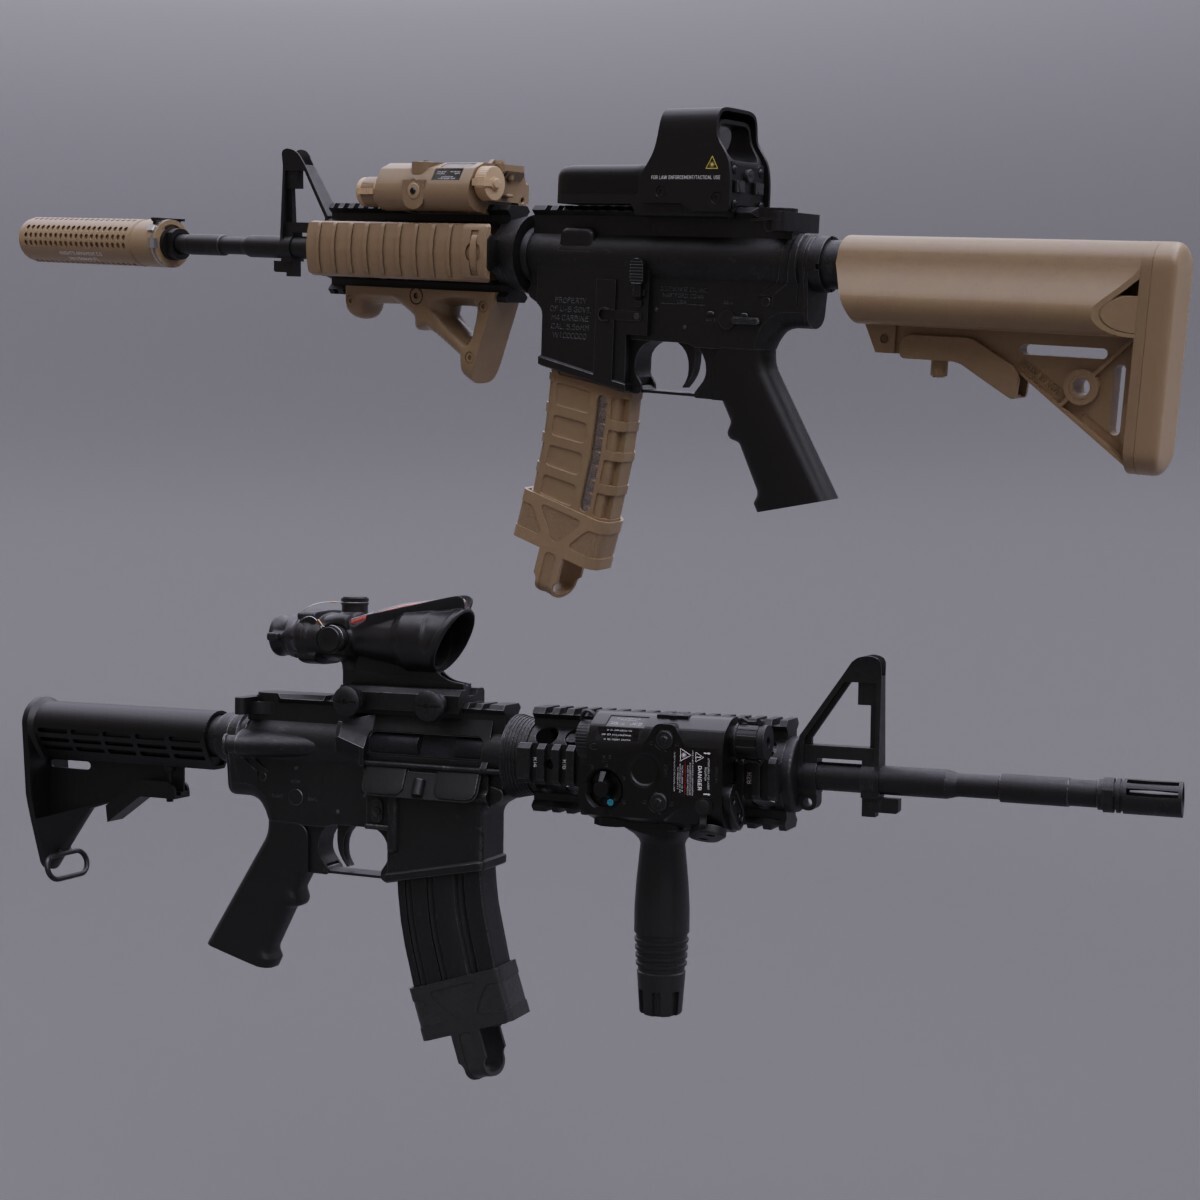 ArtStation - M4 Carbine rifle with multiple attachments